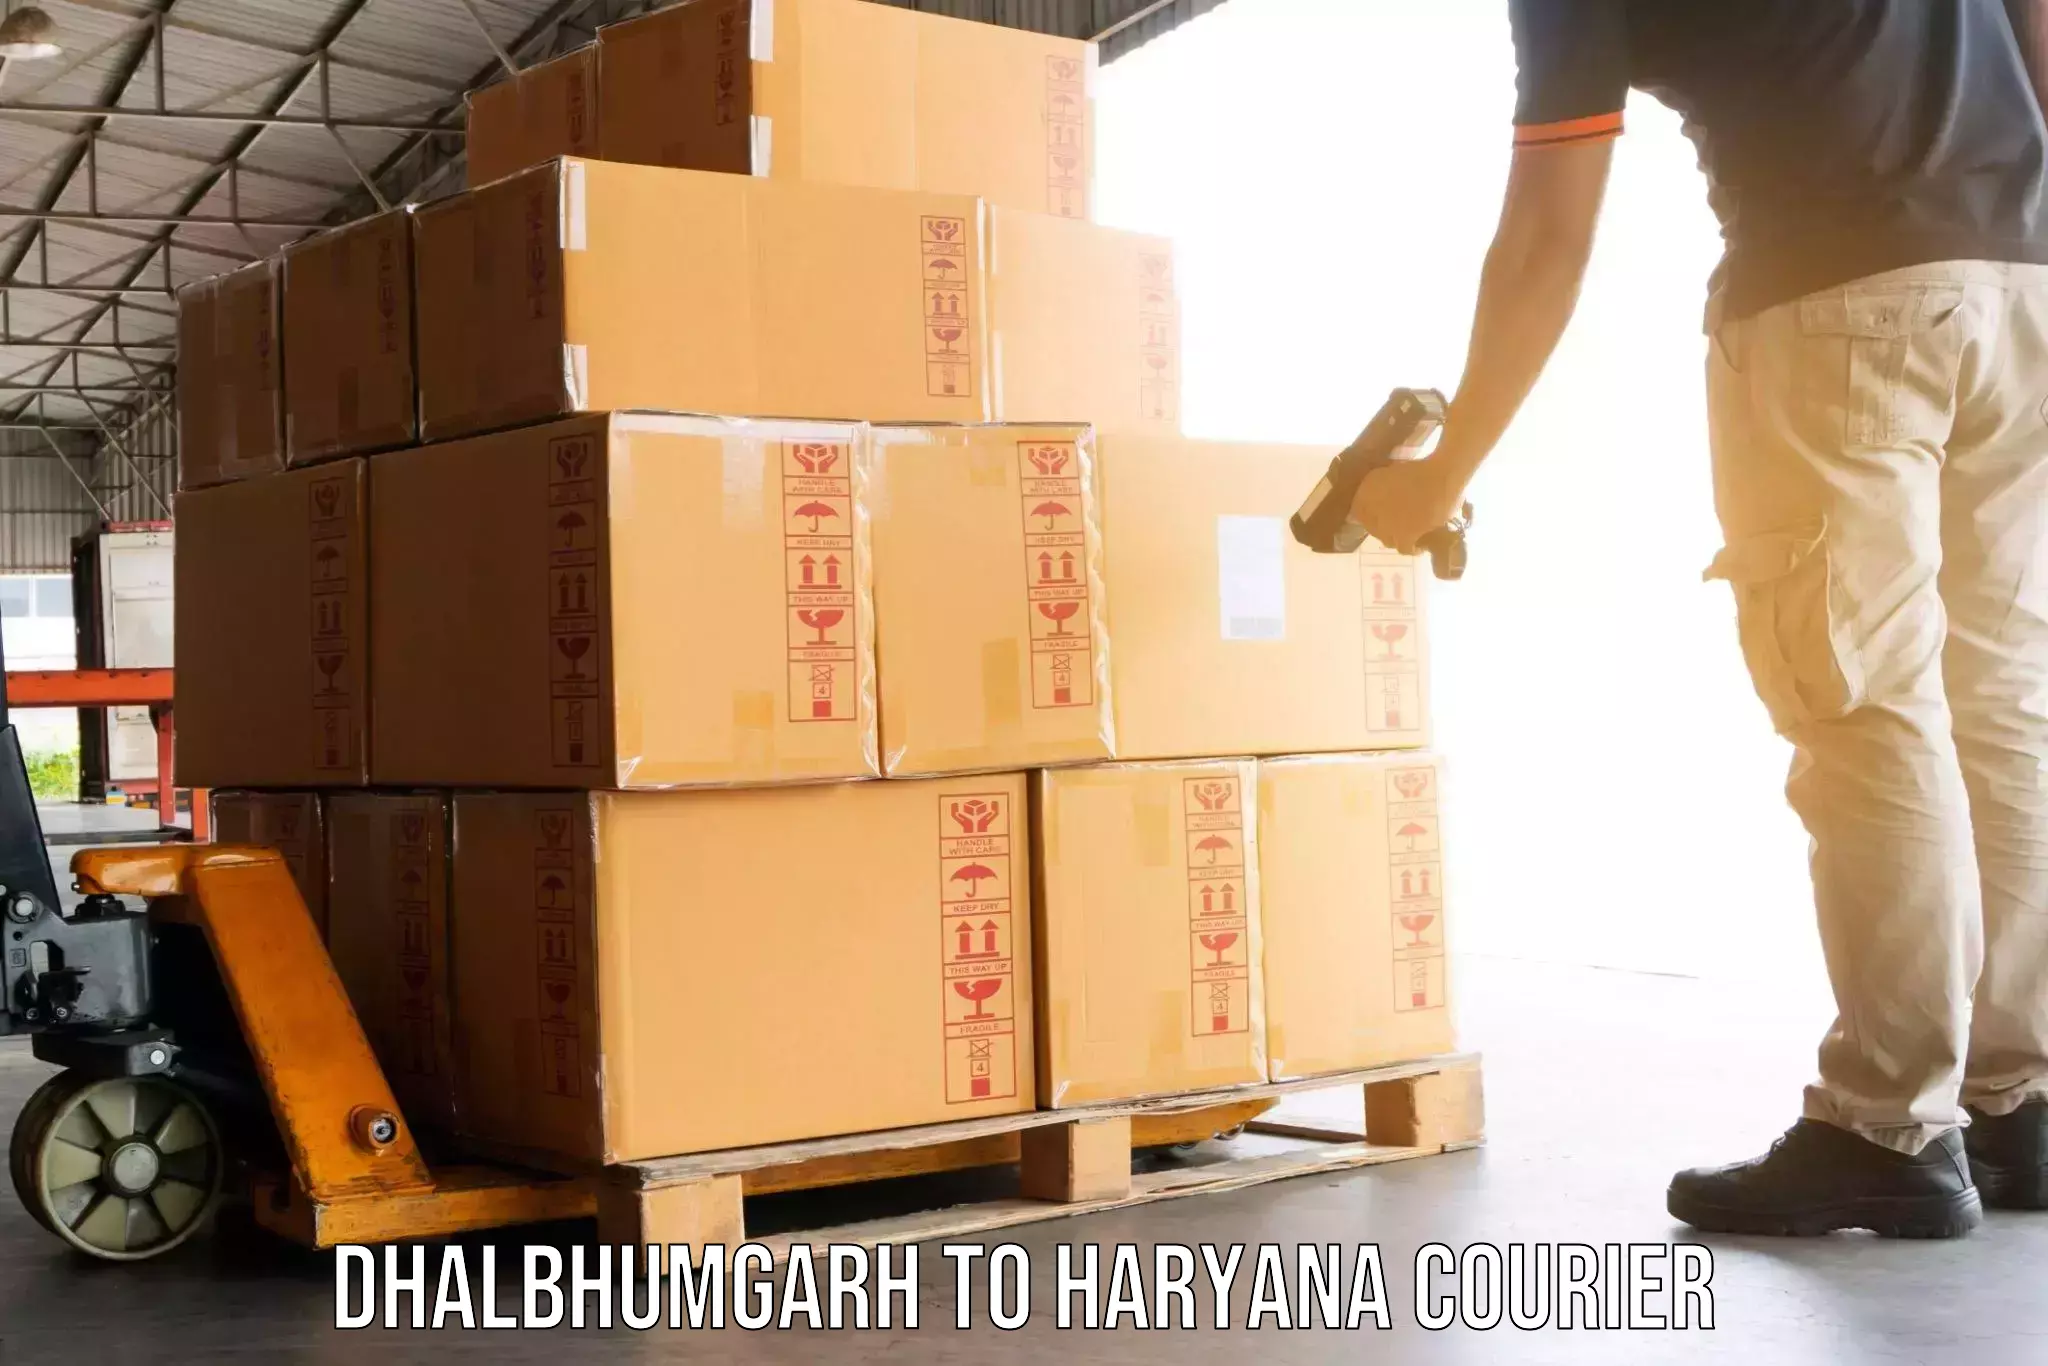 Quality relocation services Dhalbhumgarh to Fatehabad